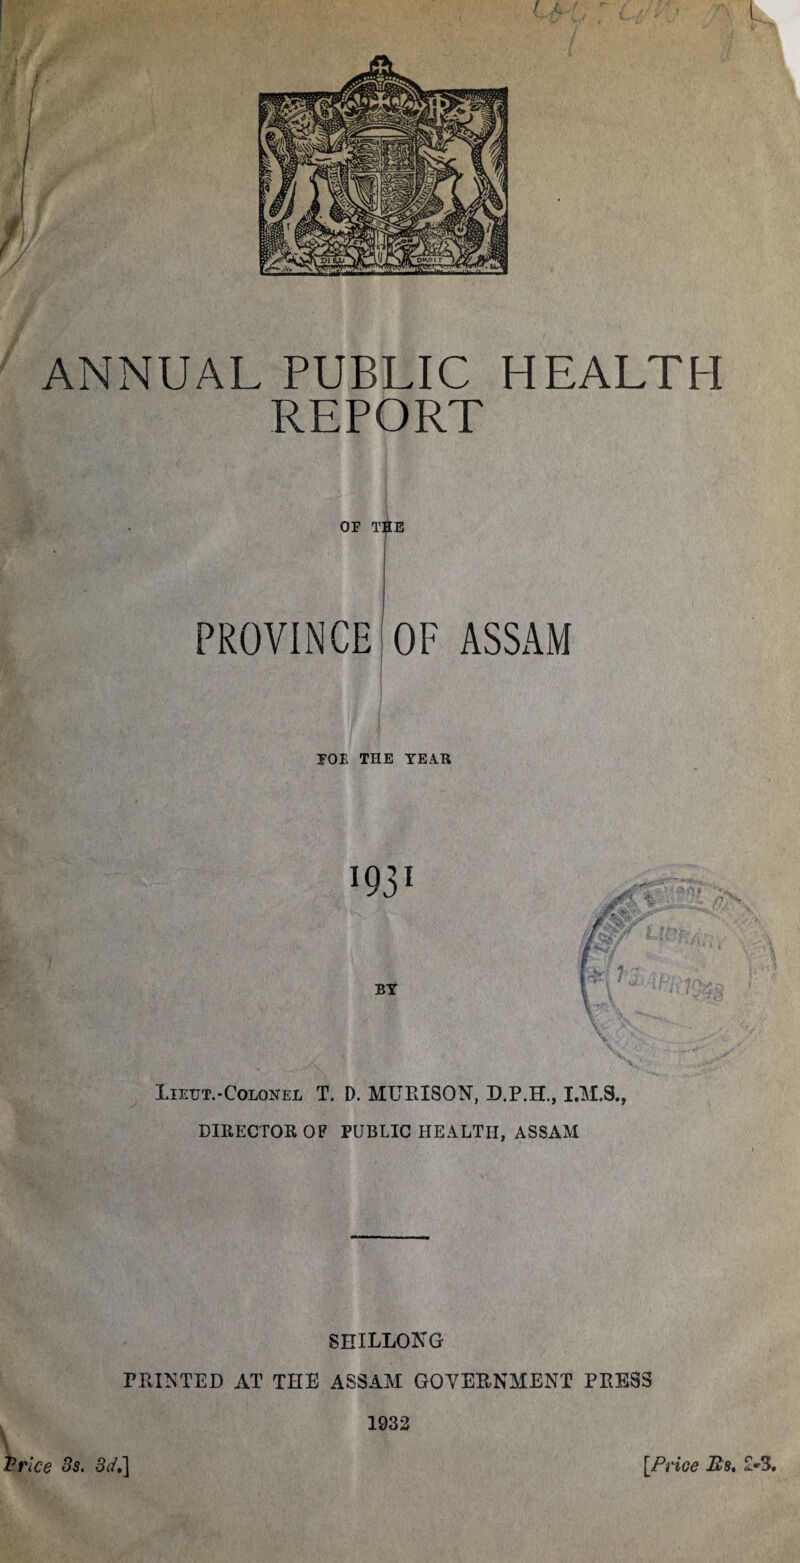 ANNUAL PUBLIC REPORT OF T H E H EALT H PROVINCE OF ASSAM FOE THE TEAR I931 N>- BY KJrf It % \ Lietjt.-Colonel T. D. MTJEISON, D.P.H., DIRECTOR OF PUBLIC HEALTH, ASSAM SHILLONG PRINTED AT THE ASSAM GOVERNMENT PRESS 1932